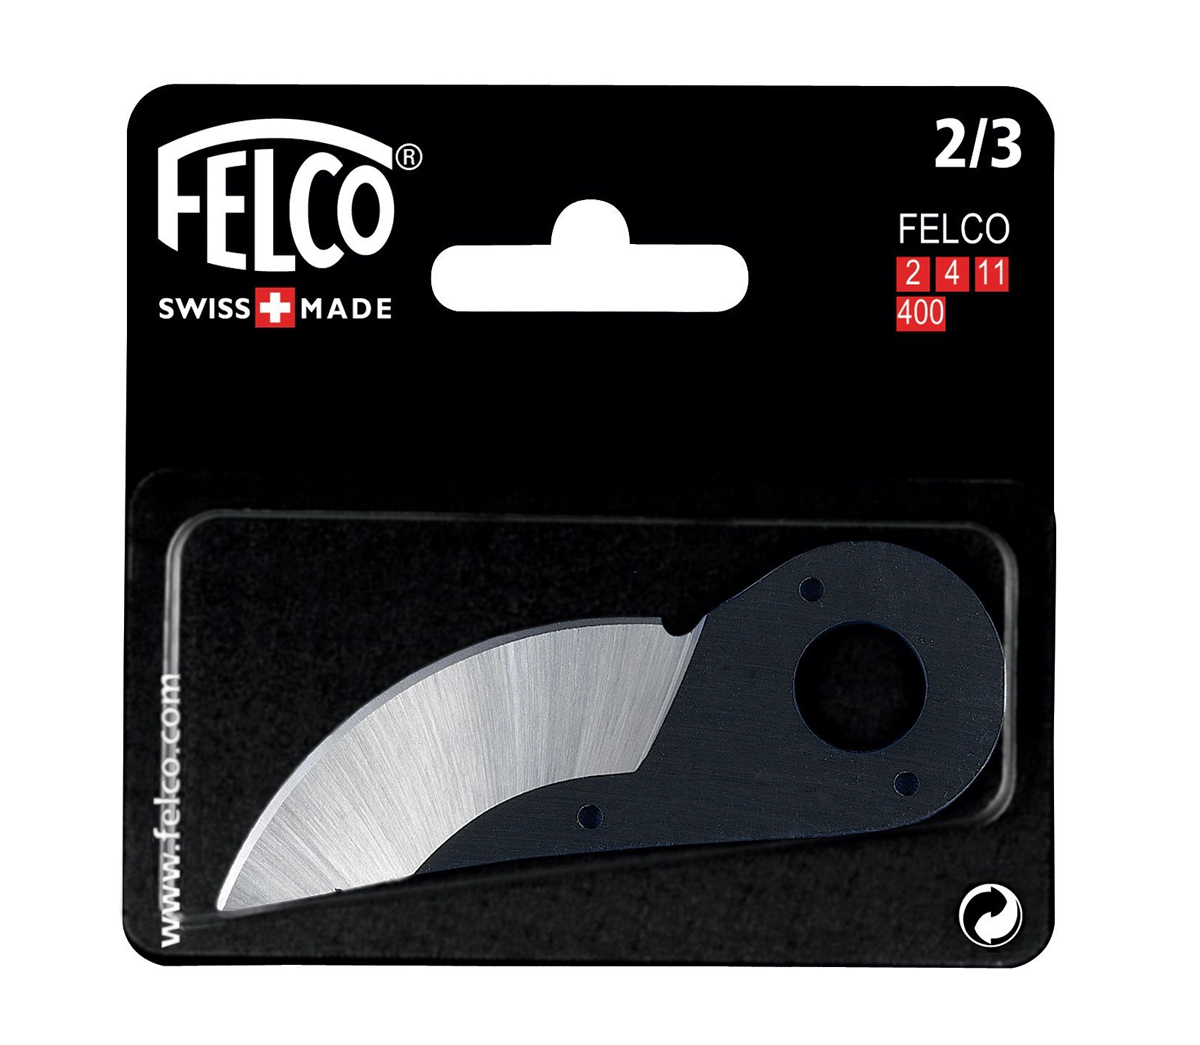 2 - 3 Cutting Blade for F 2 4 11 Felco - Knives, Pruners, & Shears